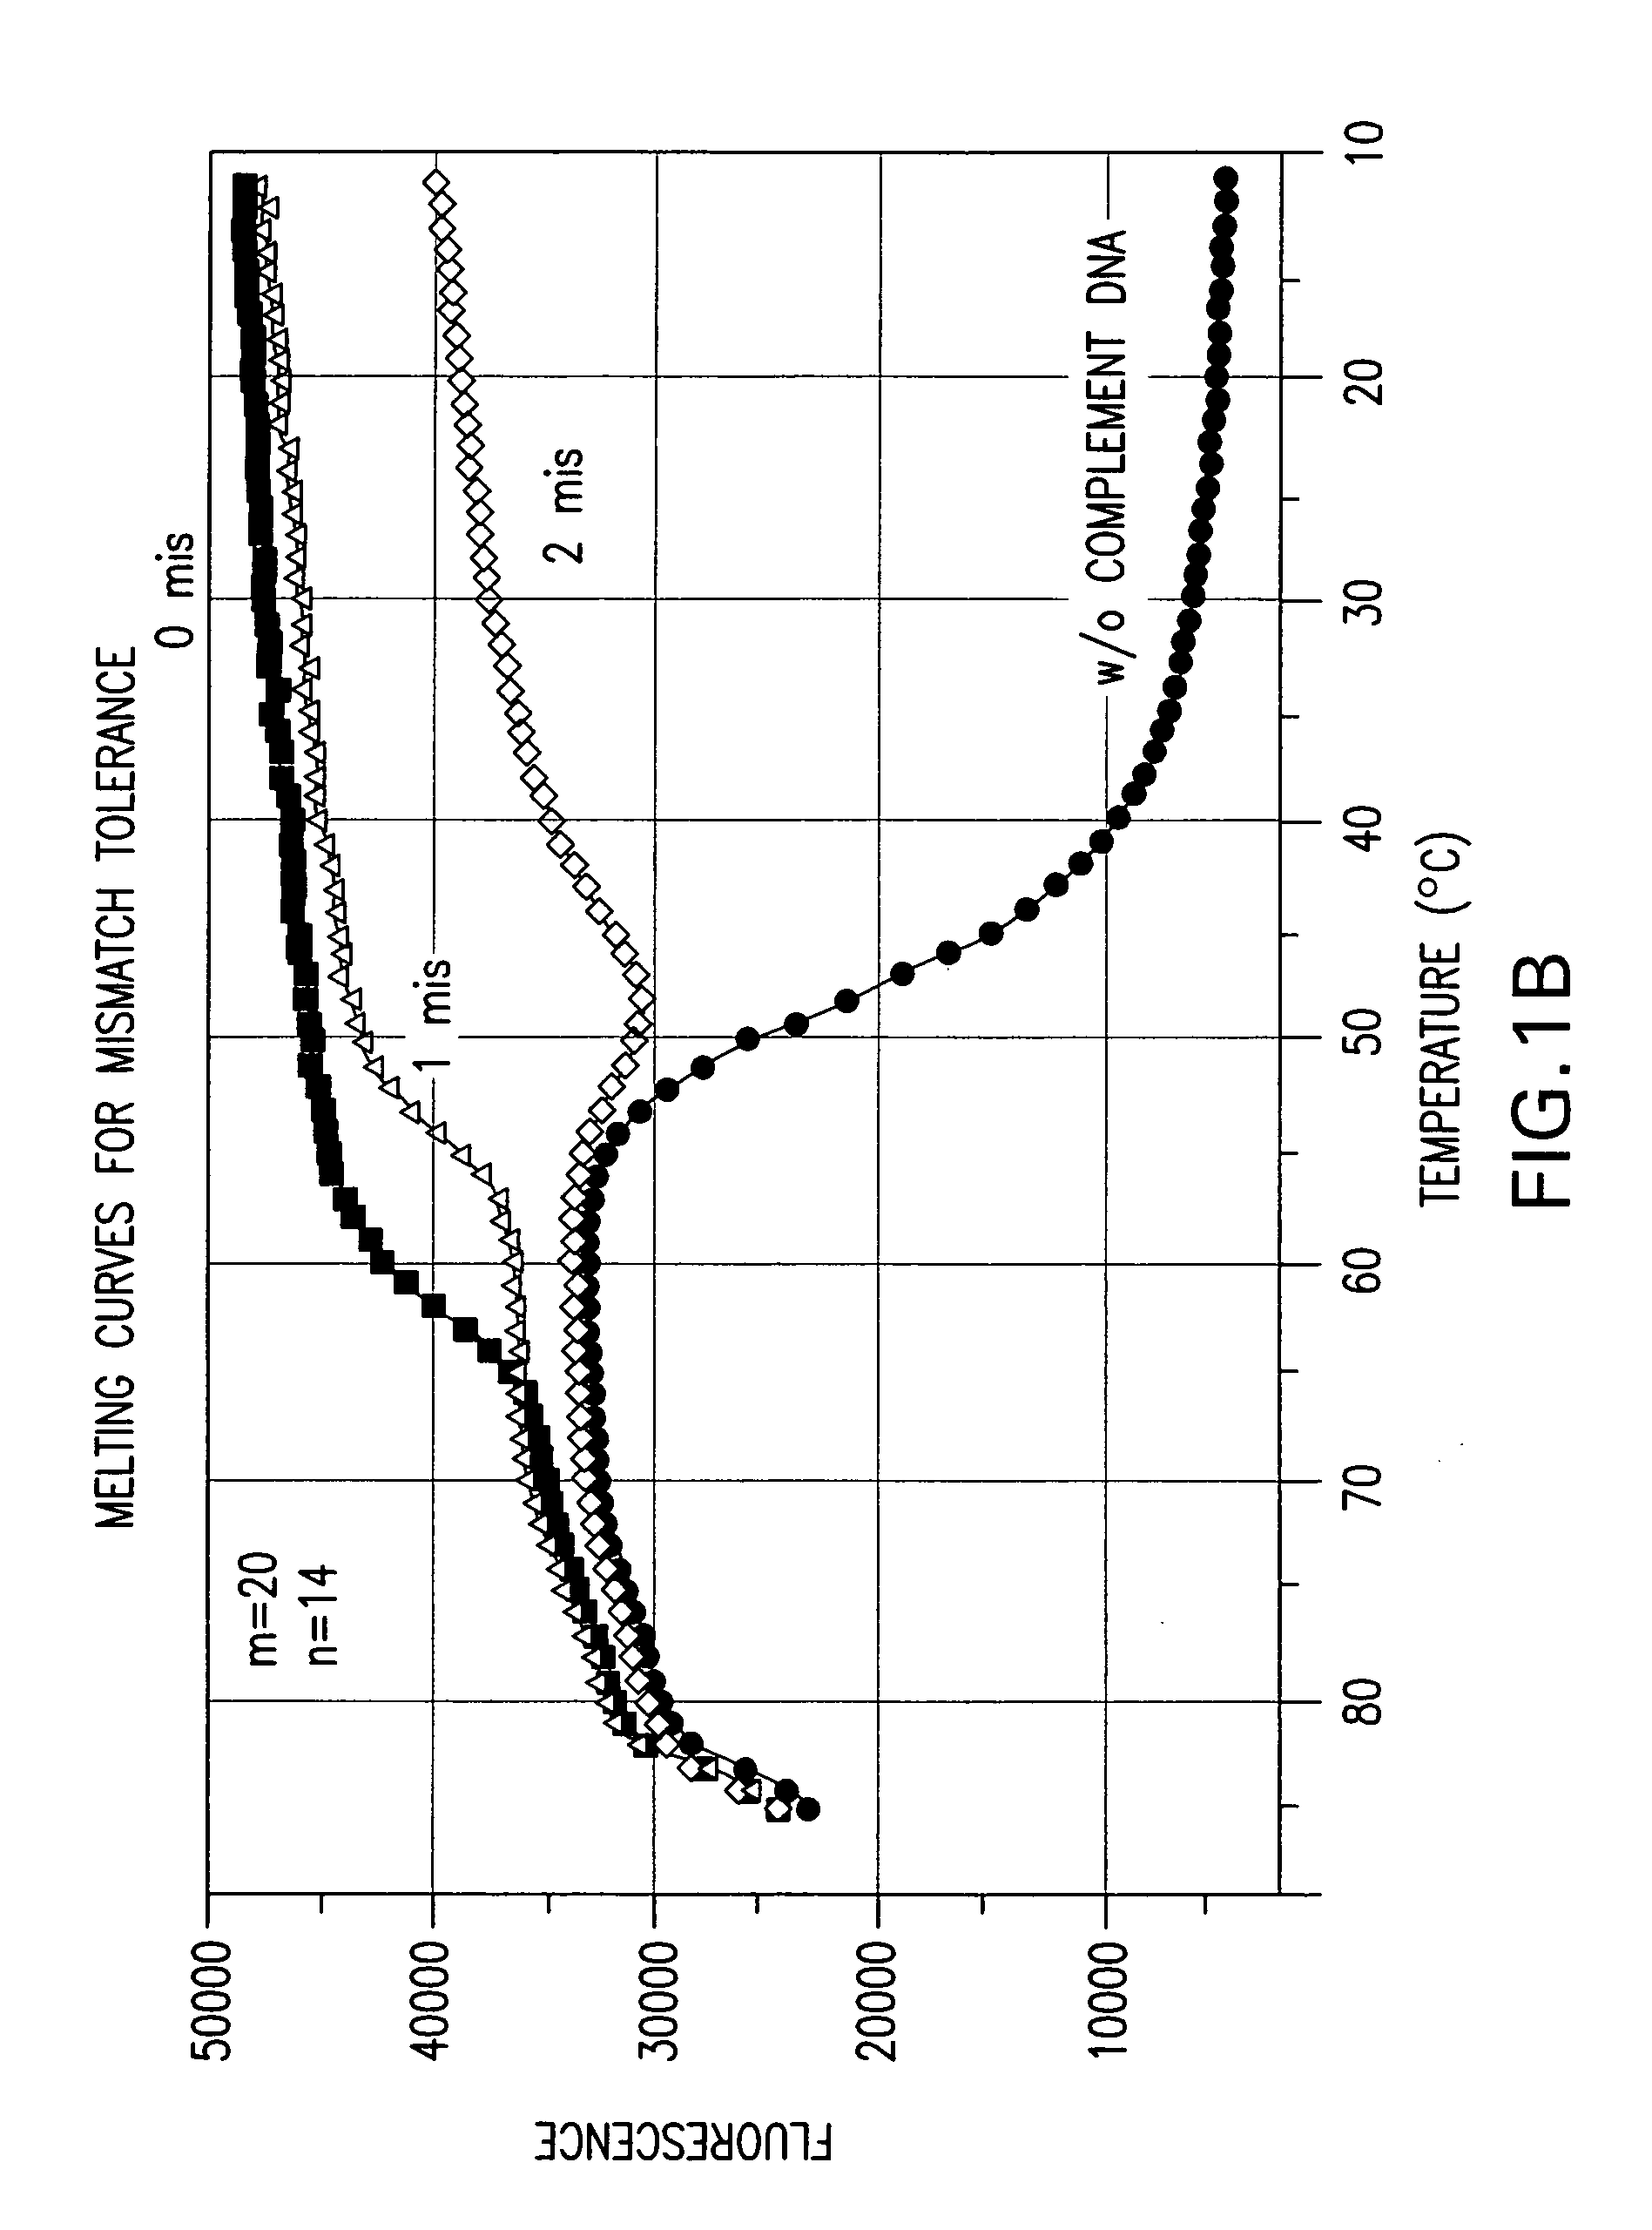 Double stranded linear nucleic acid probe and uses thereof